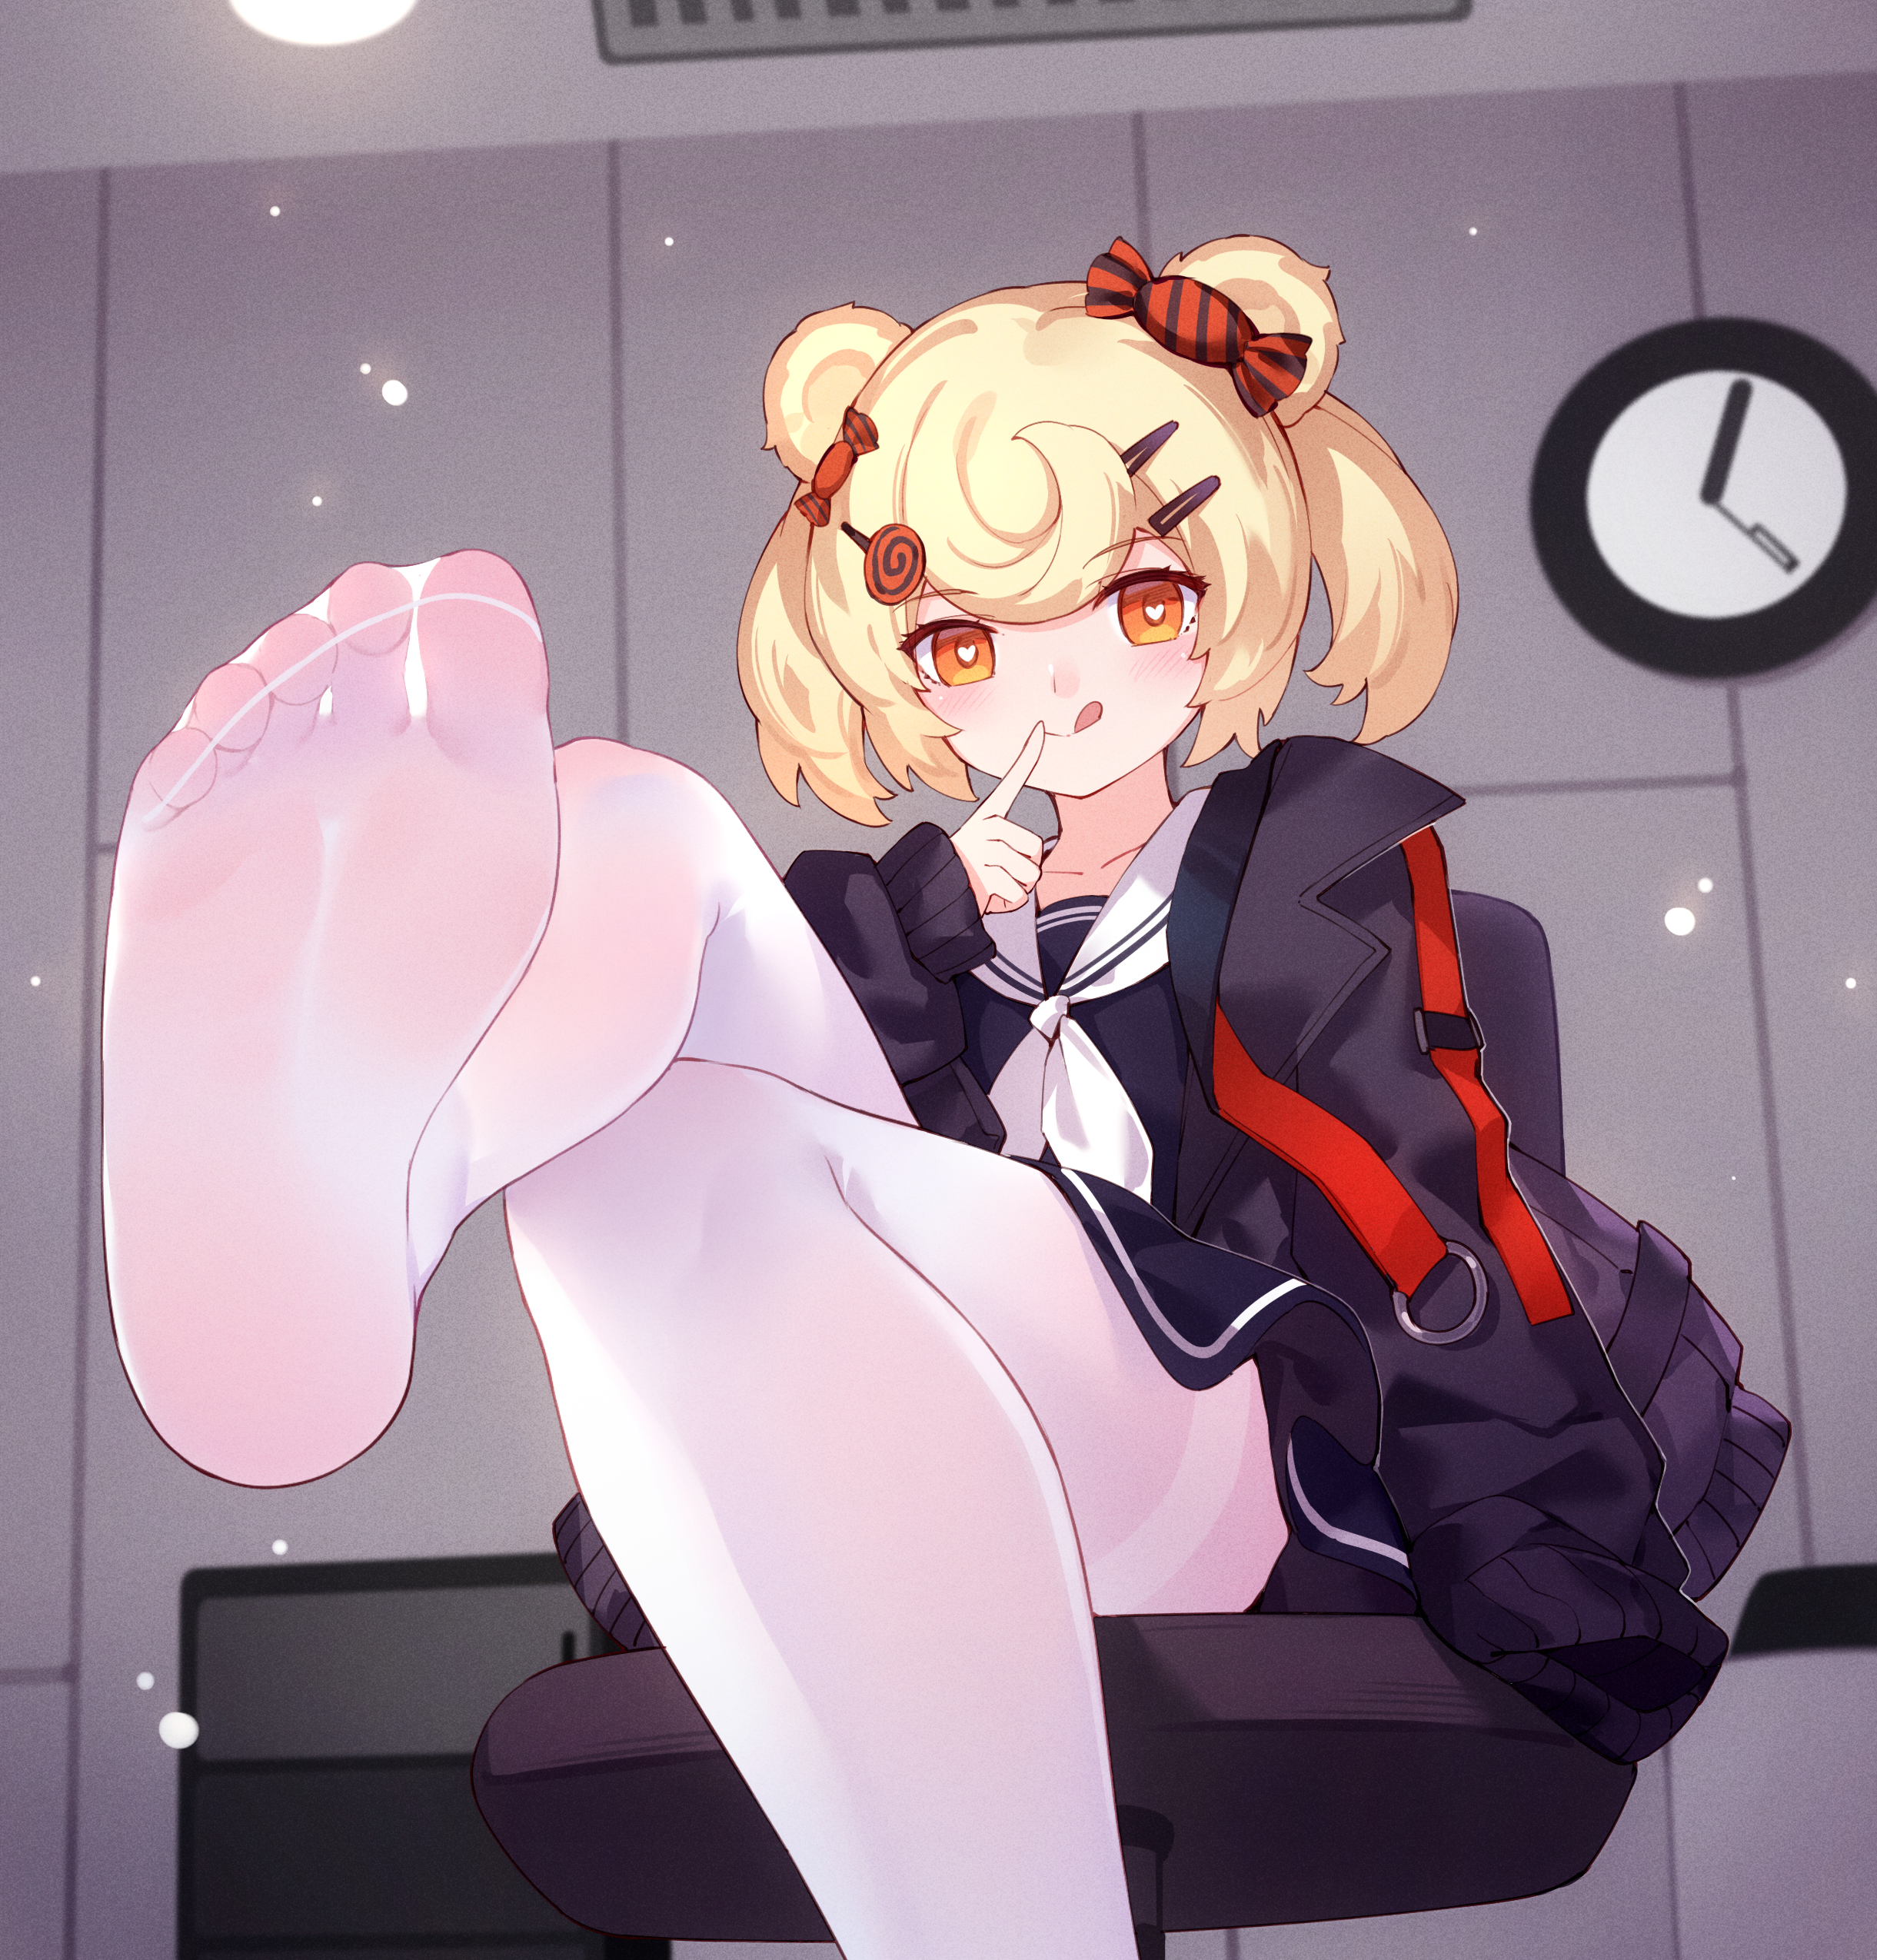 Anime 2441x2549 feet feet in the air foot fetishism white stockings portrait display anime girls heart eyes tongue out clocks schoolgirl school uniform stockings looking at viewer Pixiv loli Arknights Gum (Arknights)